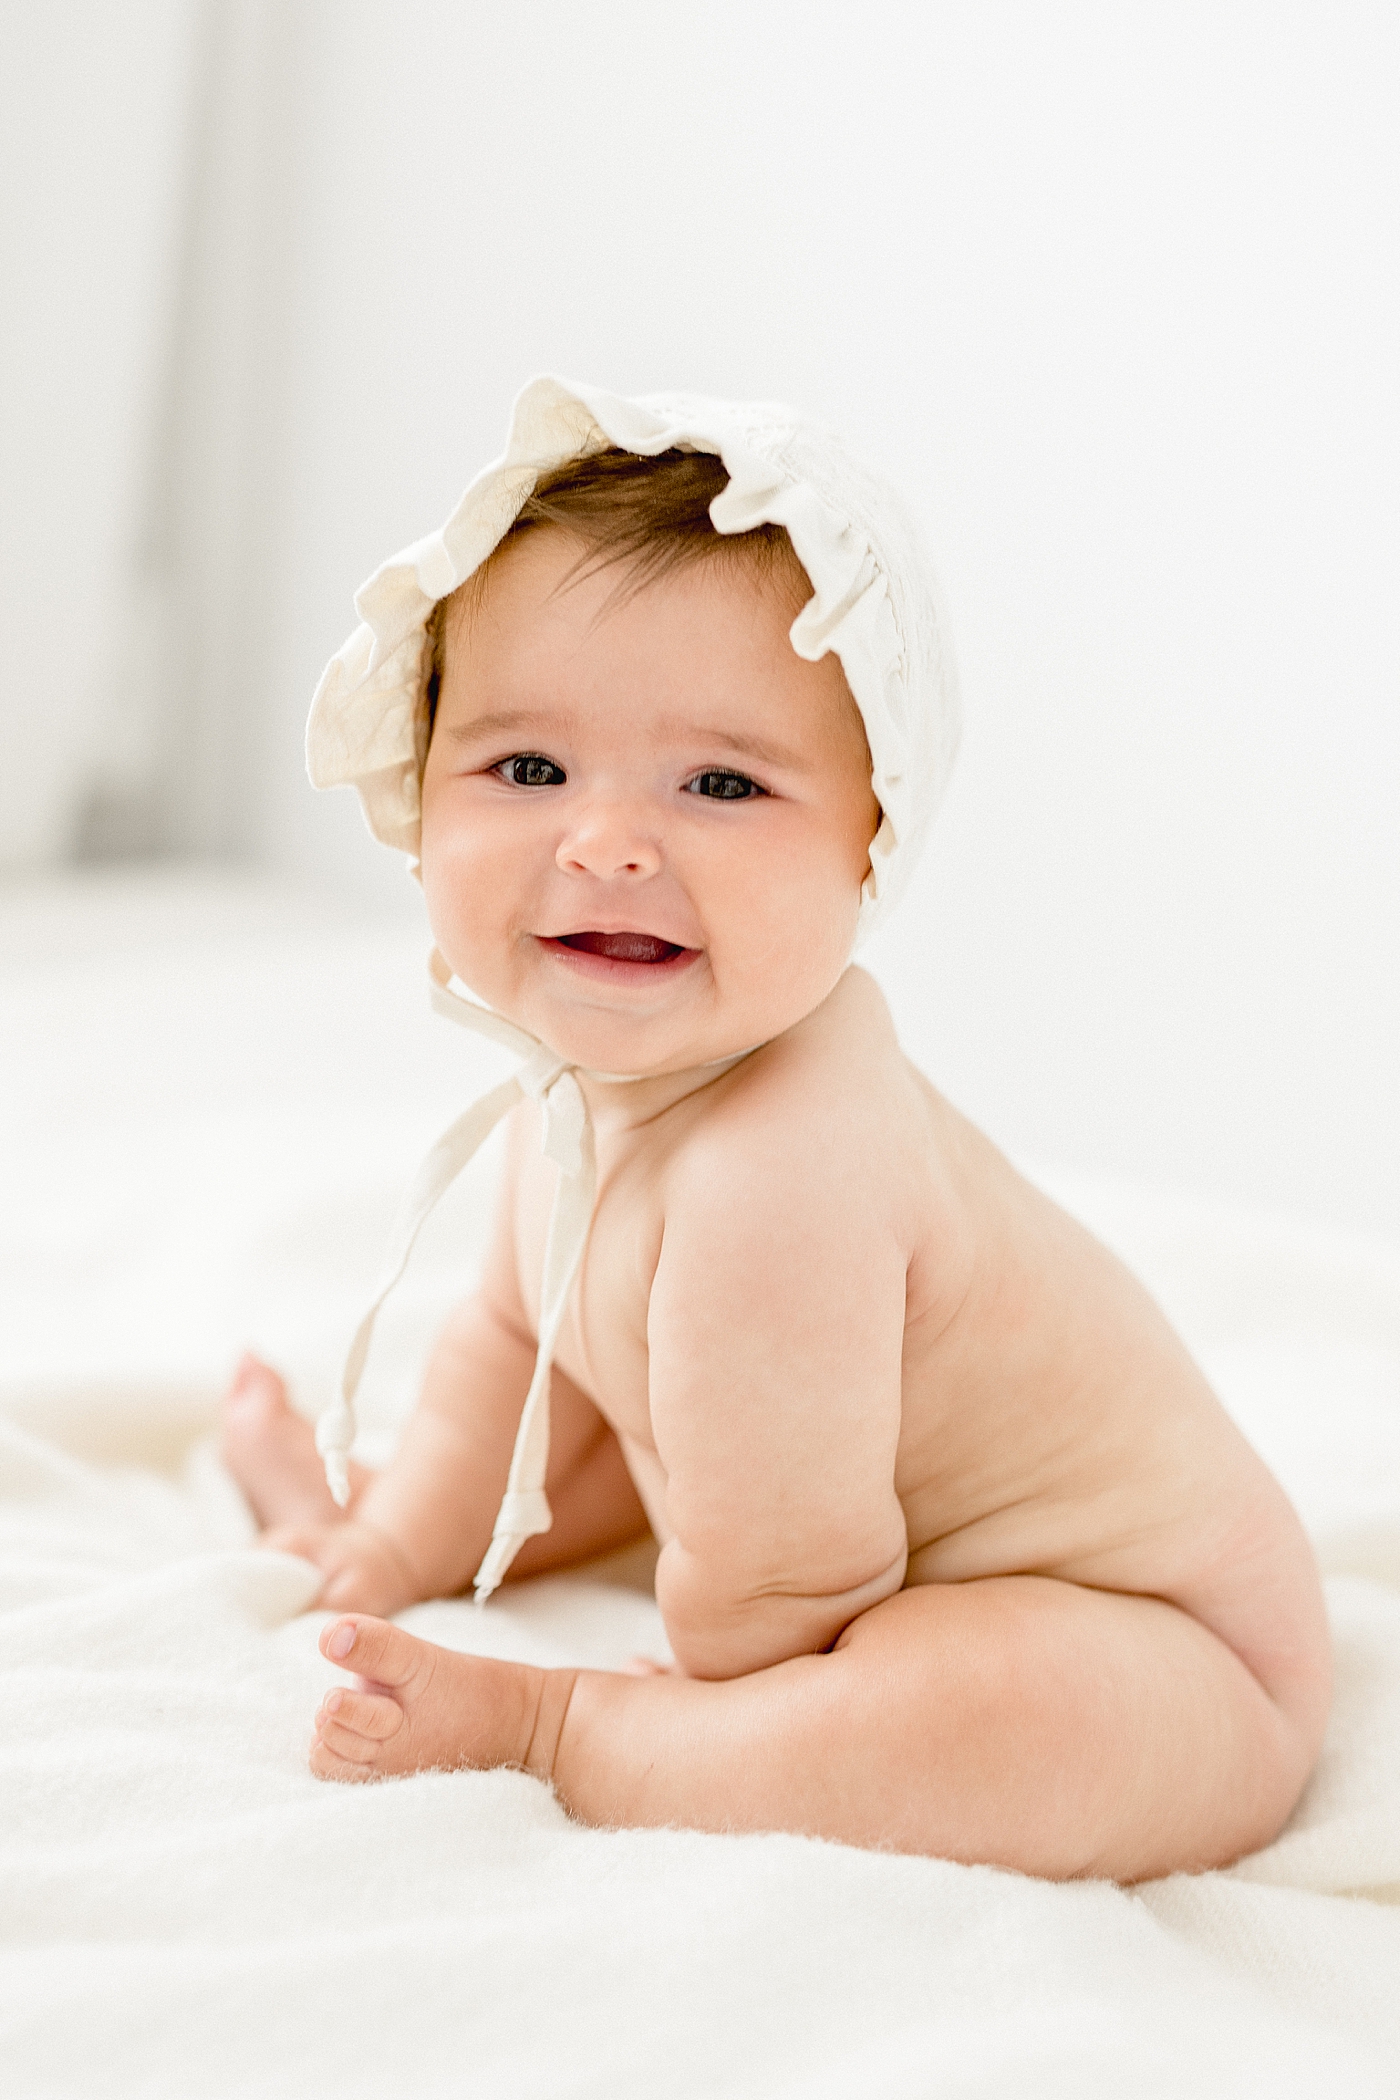 Six month old sitting and wearing a bonnet. Photos by Brittany Elise Photography.